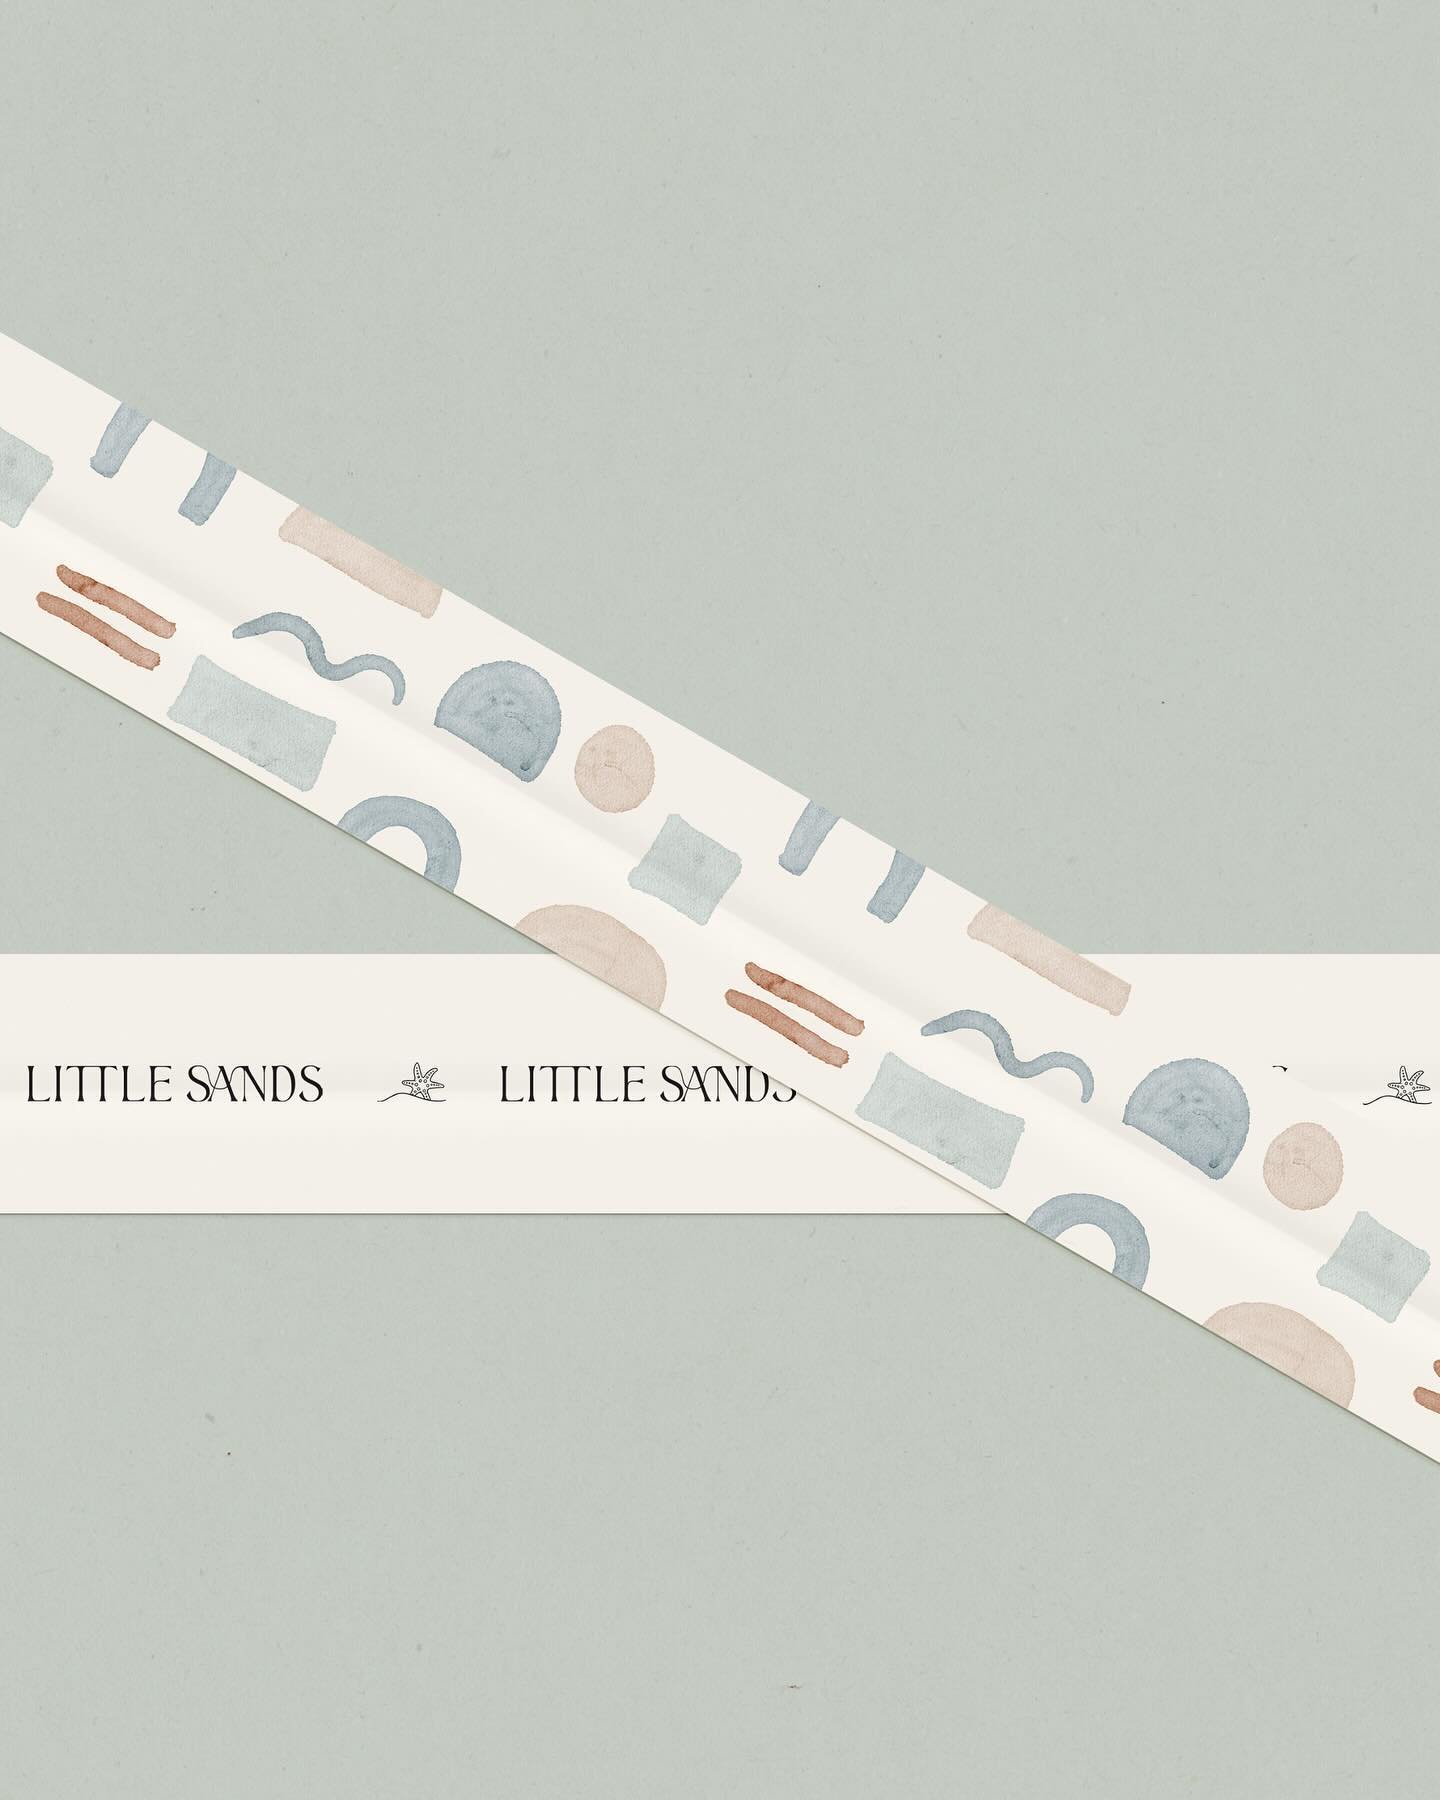 Another look at the stunning details of this coastal-inspired brand for Little Sands! ✨ 

Every hand-drawn element, from the starfish to the textured waves, is crafted to tell their story of creating beautiful, comfortable spaces for children.

But d